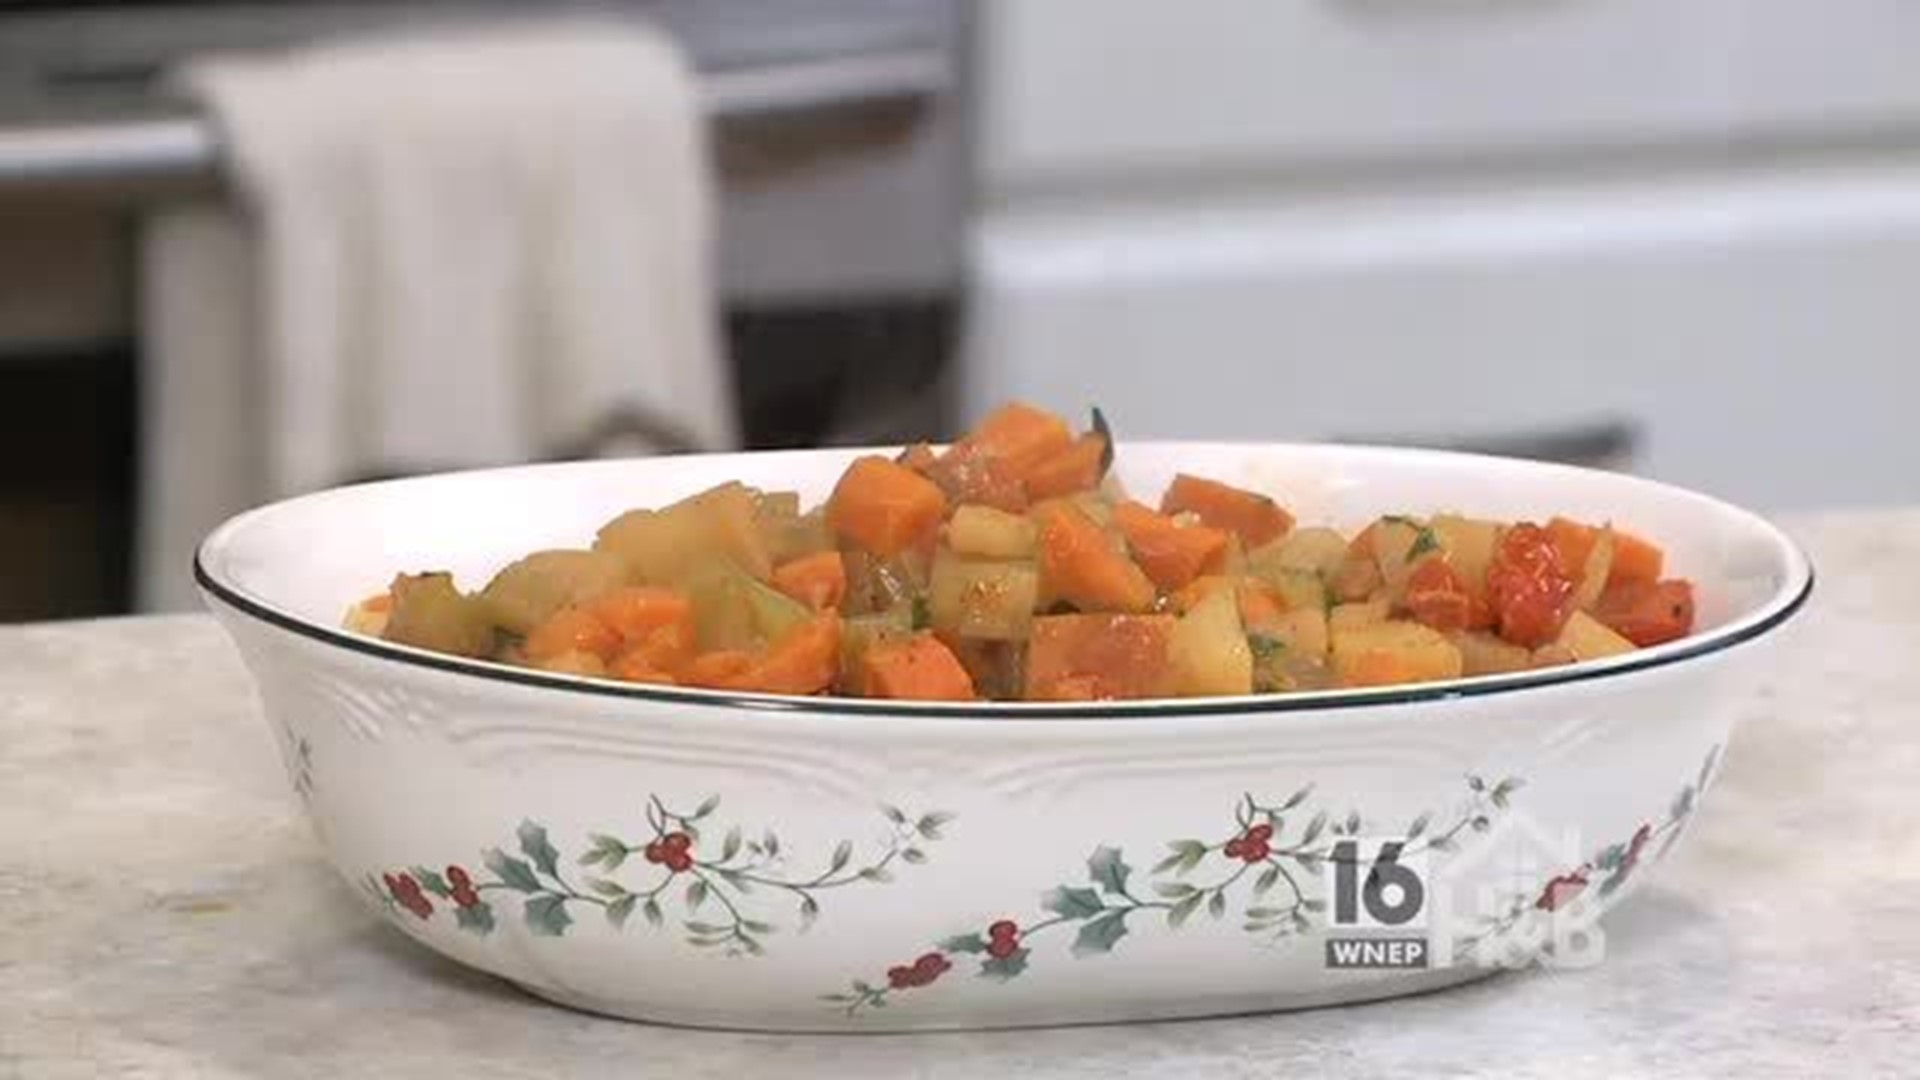 Jim Coles & his Wife make Vegetable Casserole